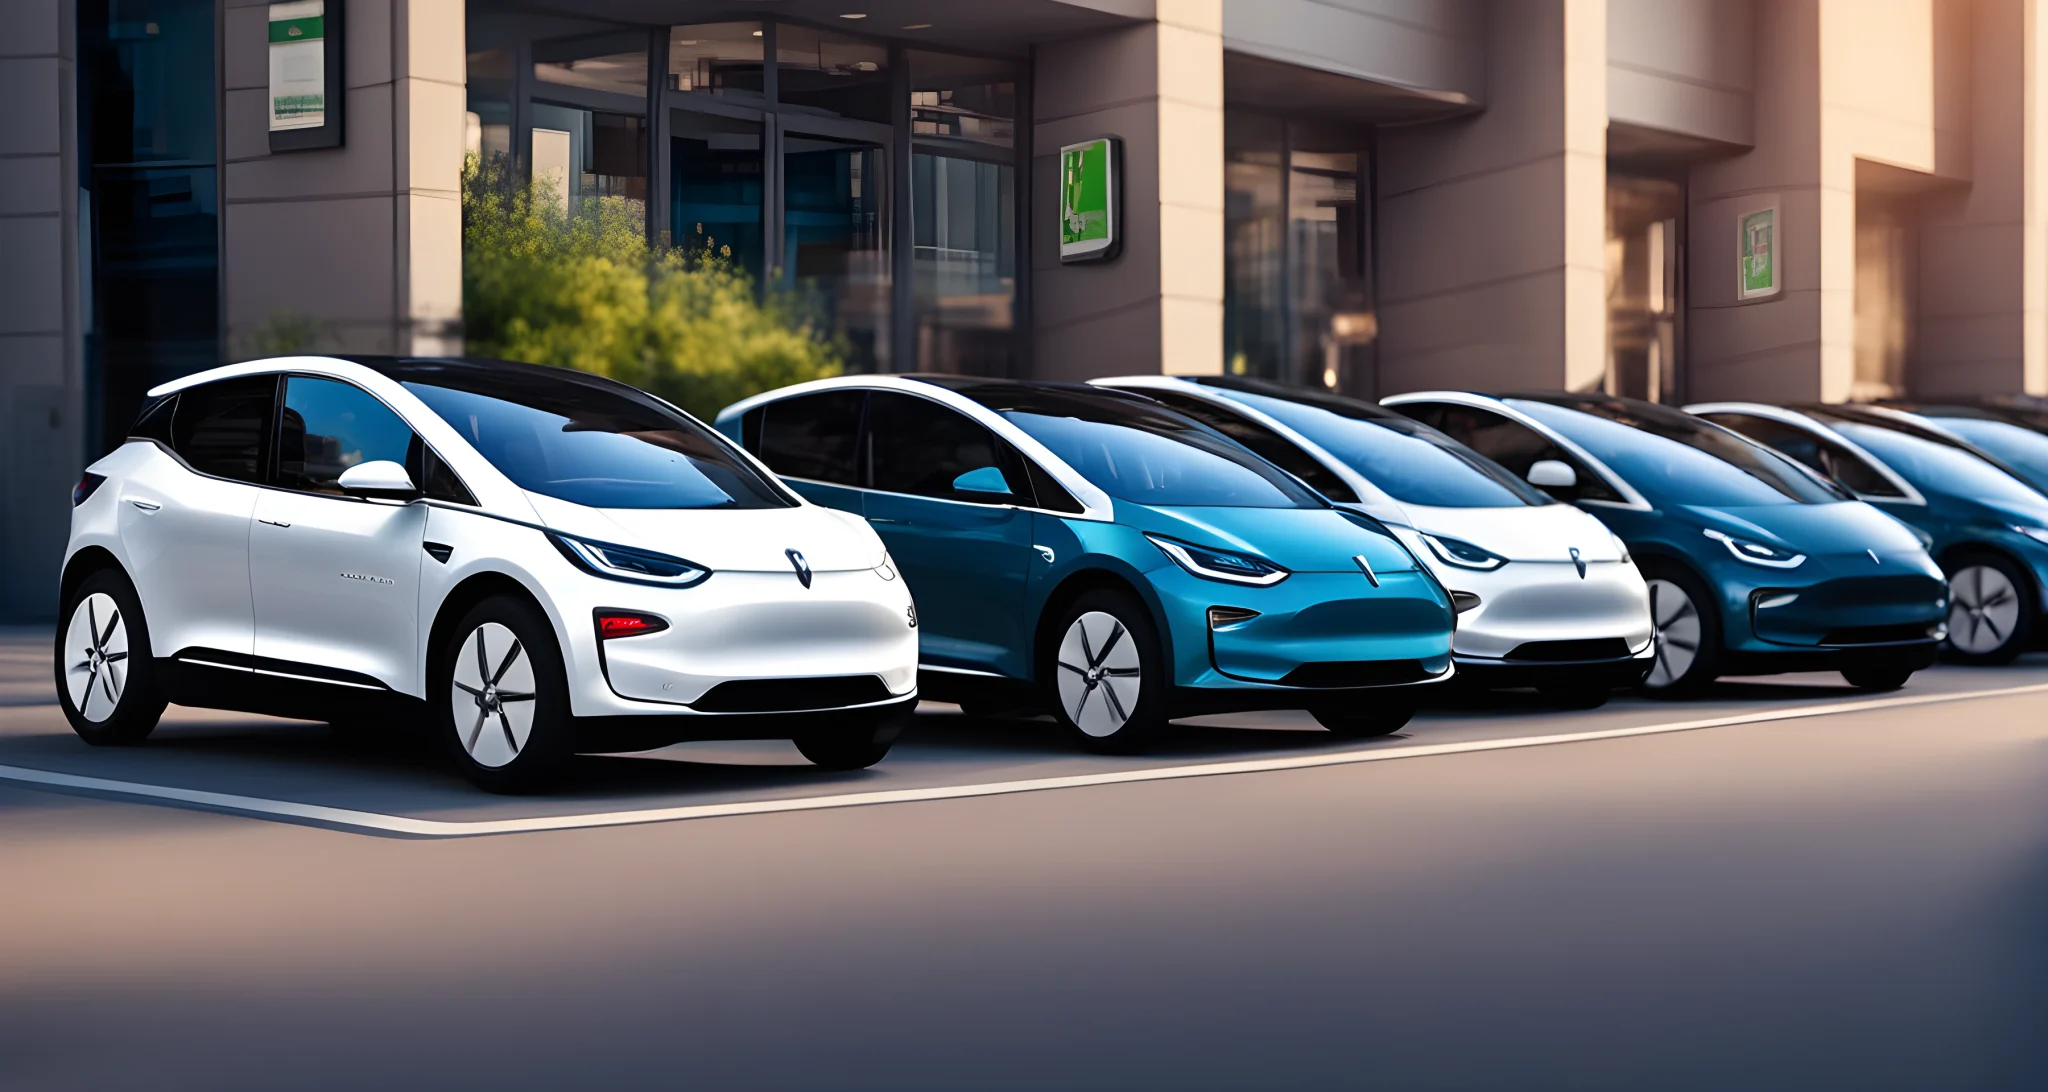 The image shows a line-up of electric vehicles with charging stations in the background.